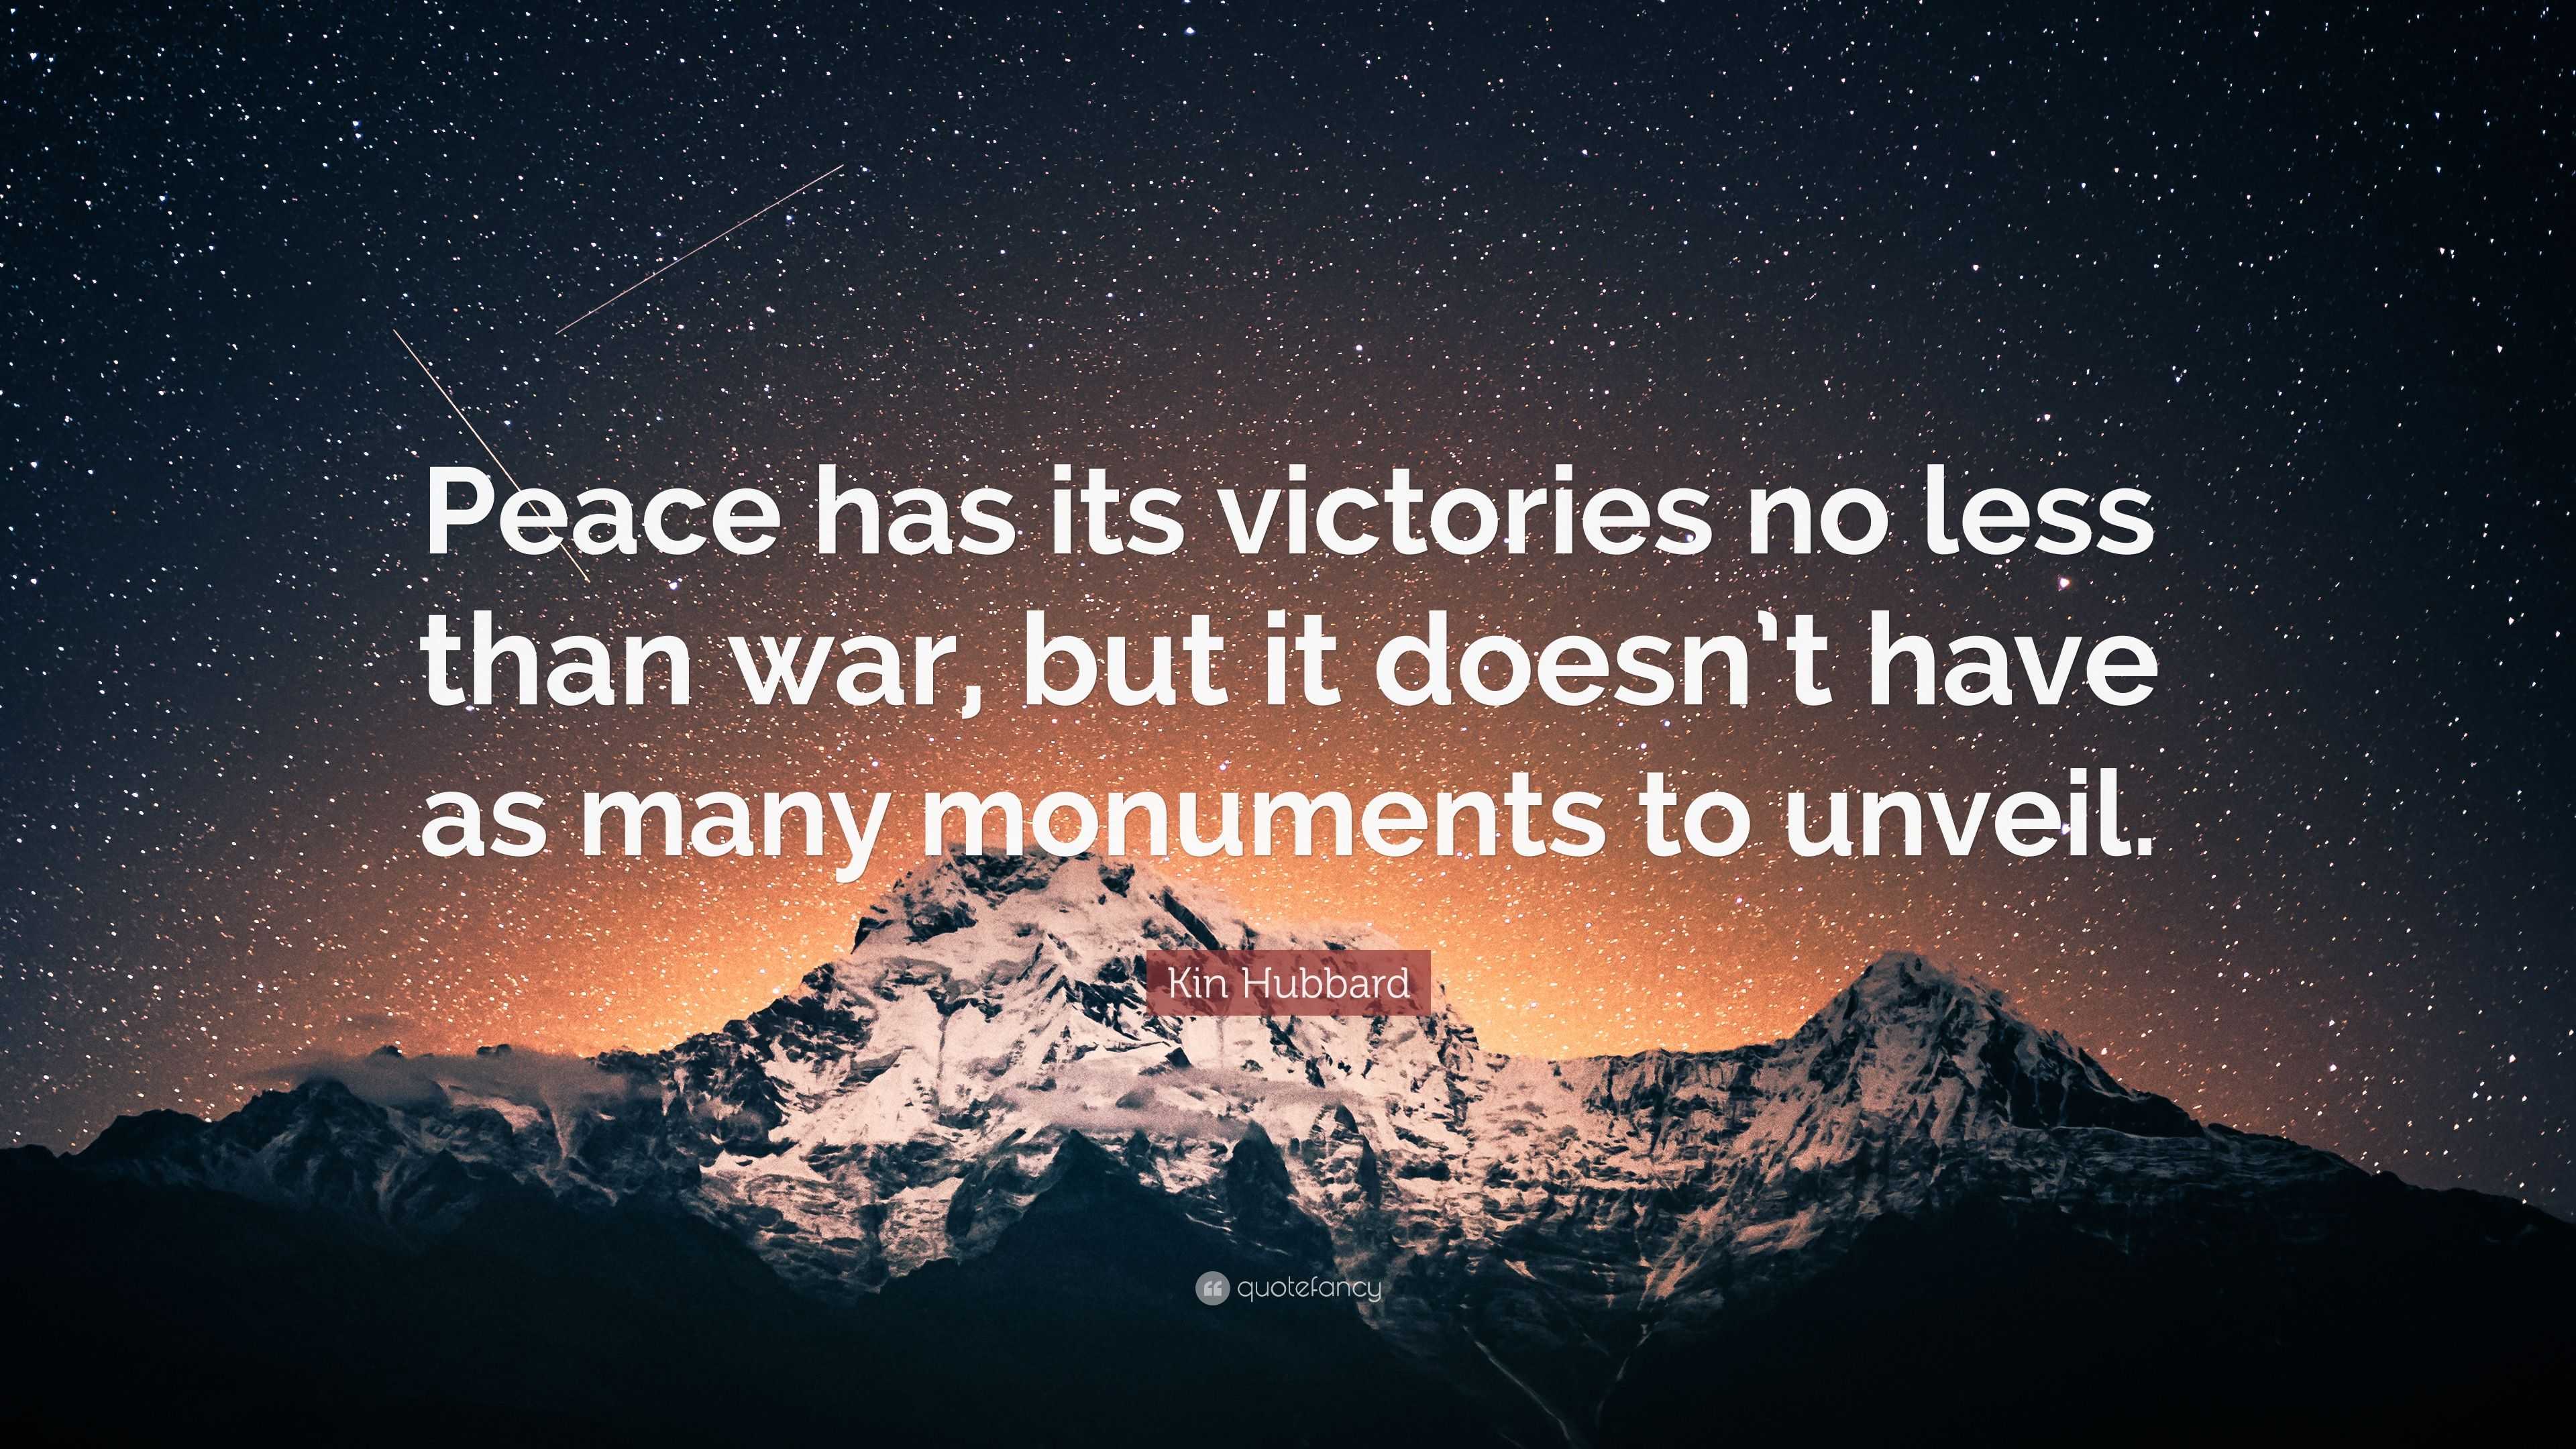 Kin Hubbard Quote: “Peace has its victories no less than war, but it ...